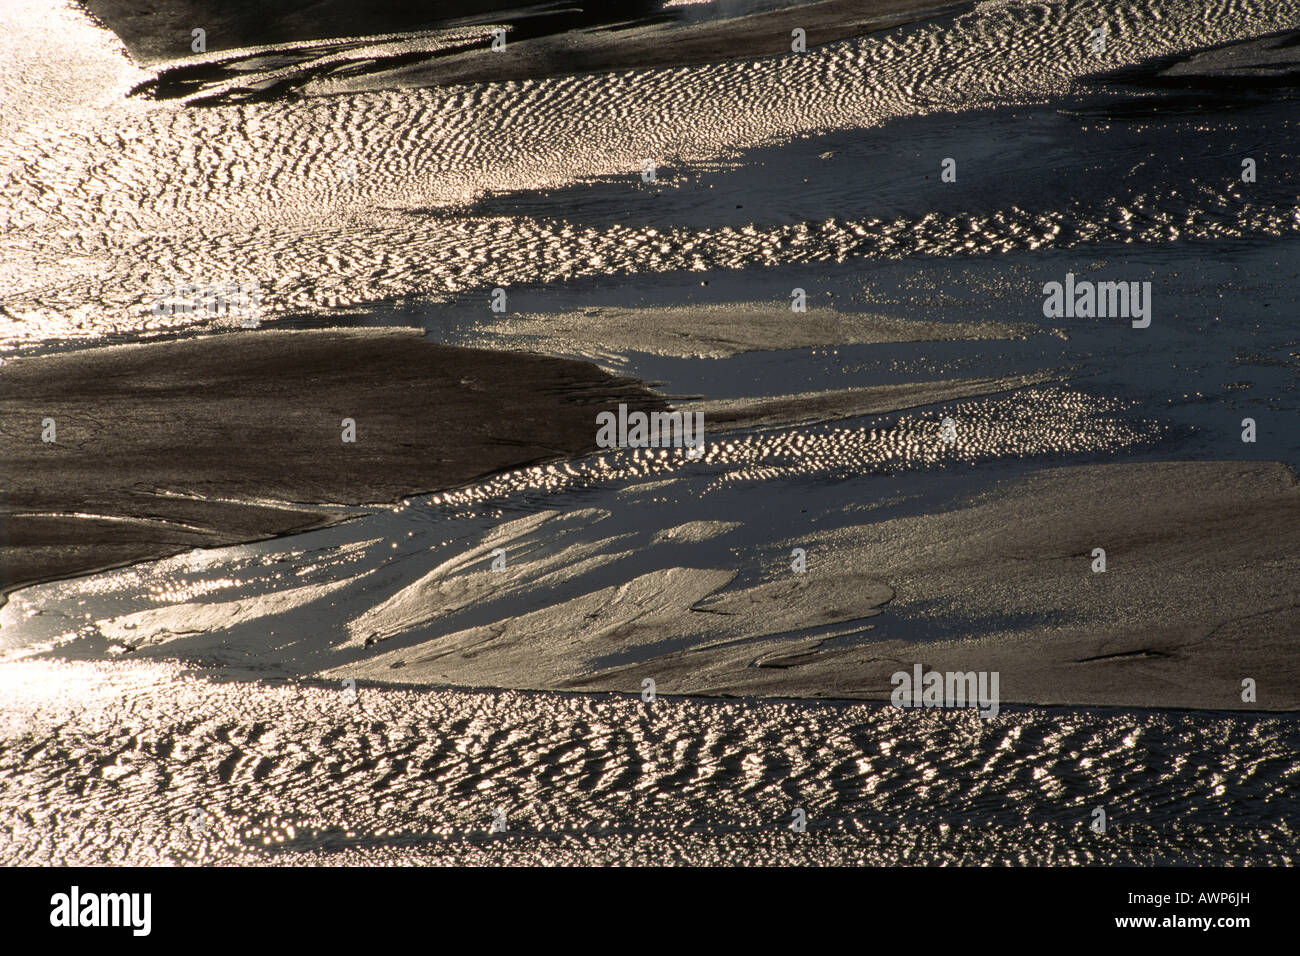 Sun reflected on riverbed, Umfolozi River, Hluhluwe-Umfolozi Game Reserve, South Africa, Africa Stock Photo